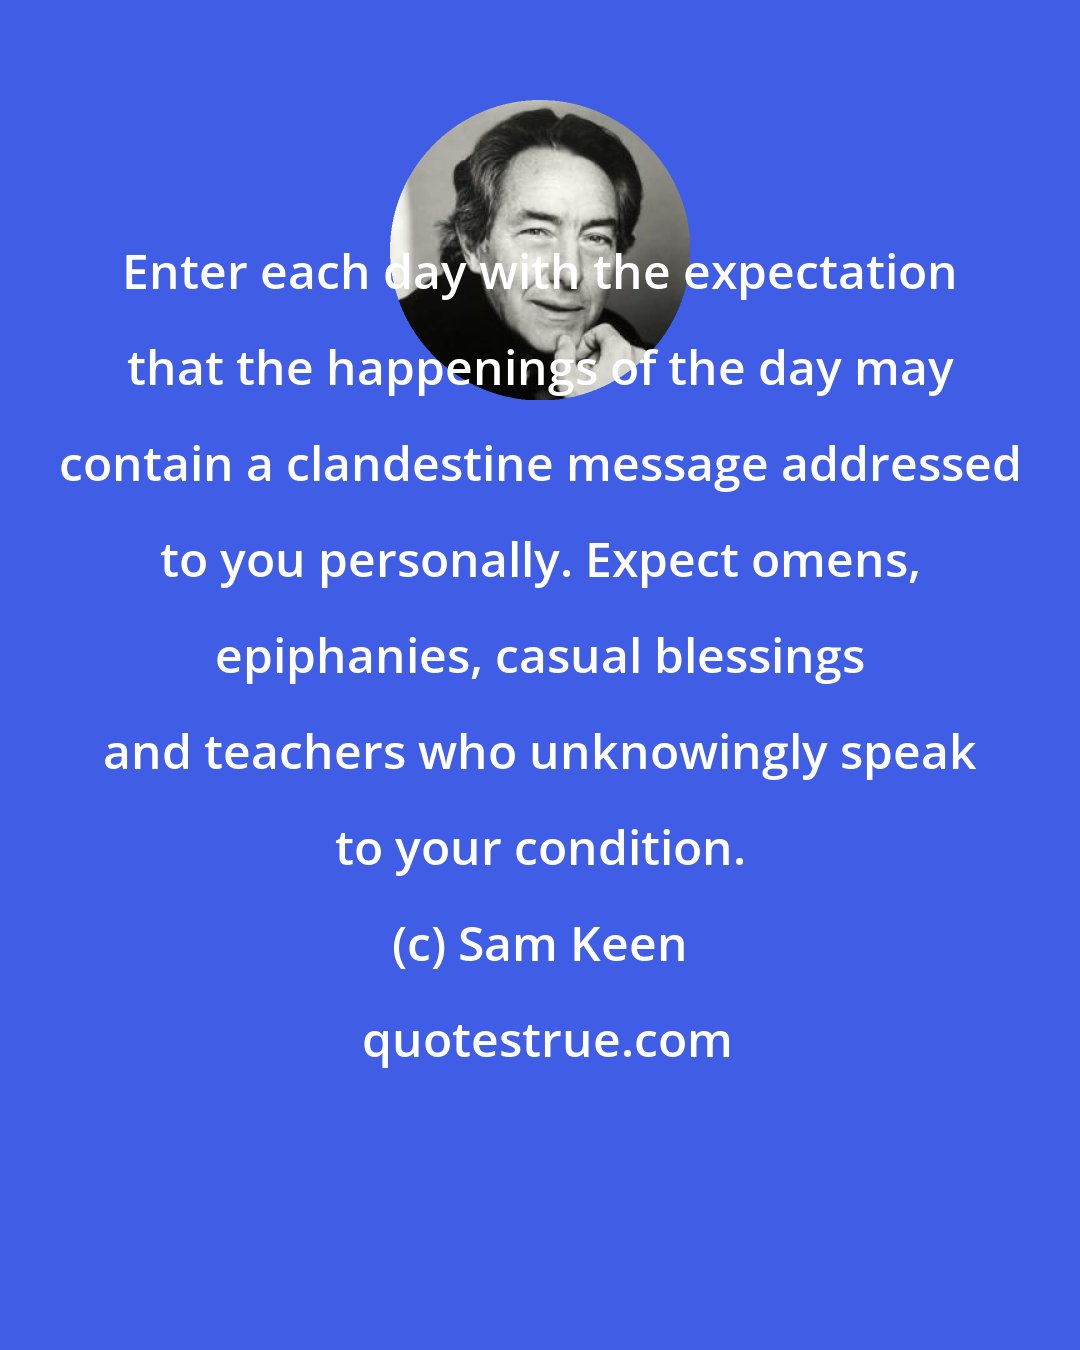 Sam Keen: Enter each day with the expectation that the happenings of the day may contain a clandestine message addressed to you personally. Expect omens, epiphanies, casual blessings and teachers who unknowingly speak to your condition.